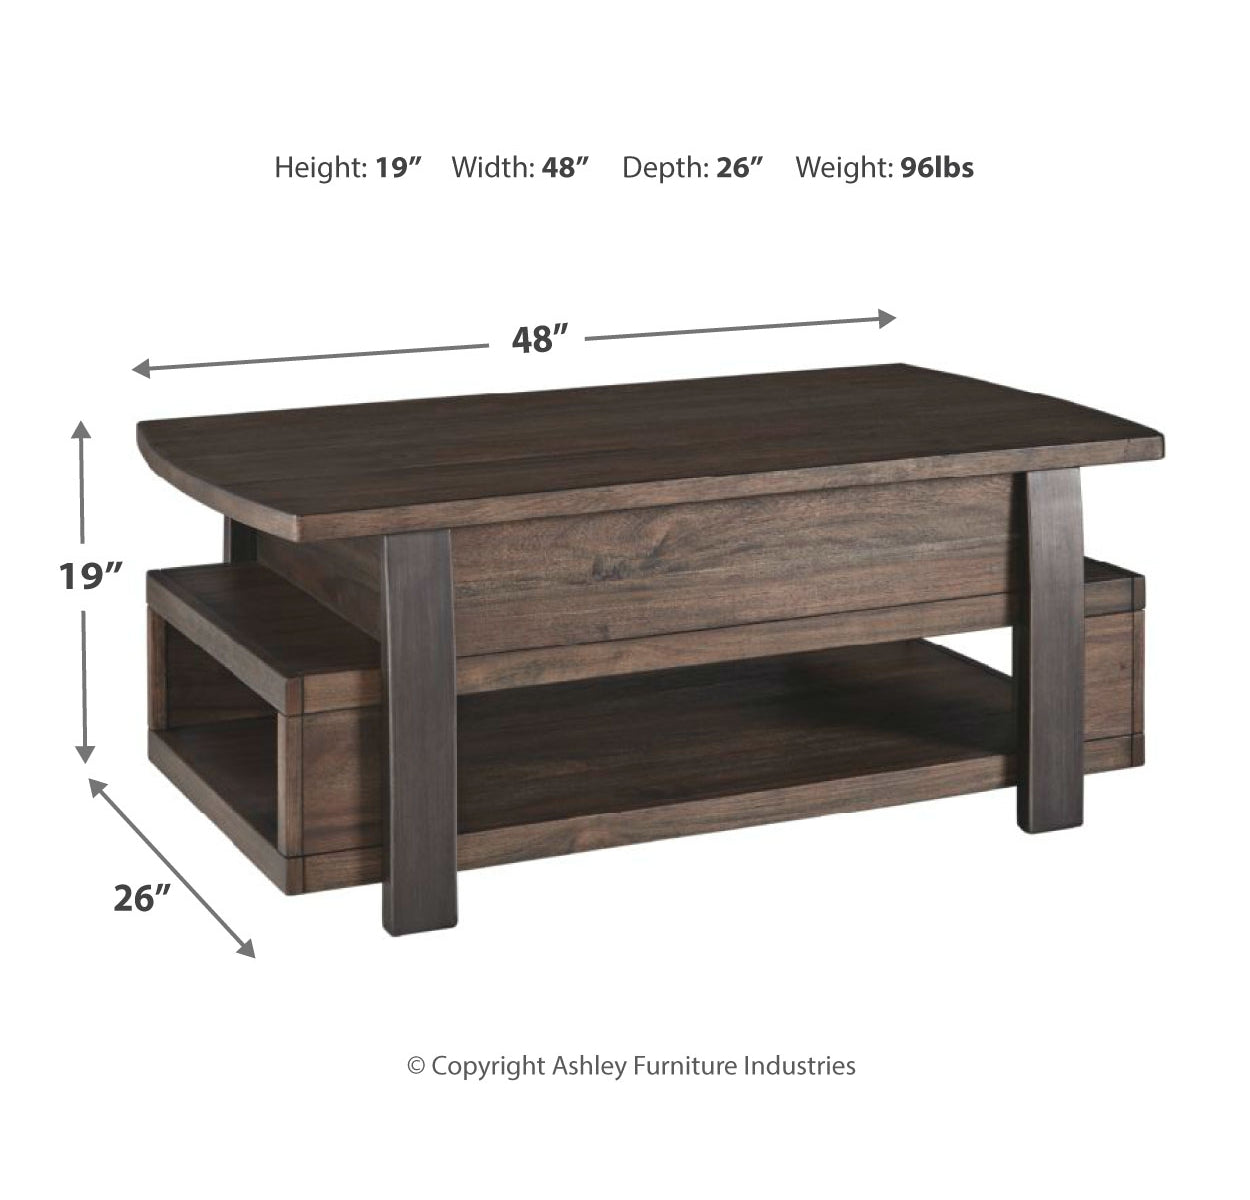 Vailbry Coffee Table with 1 End Table